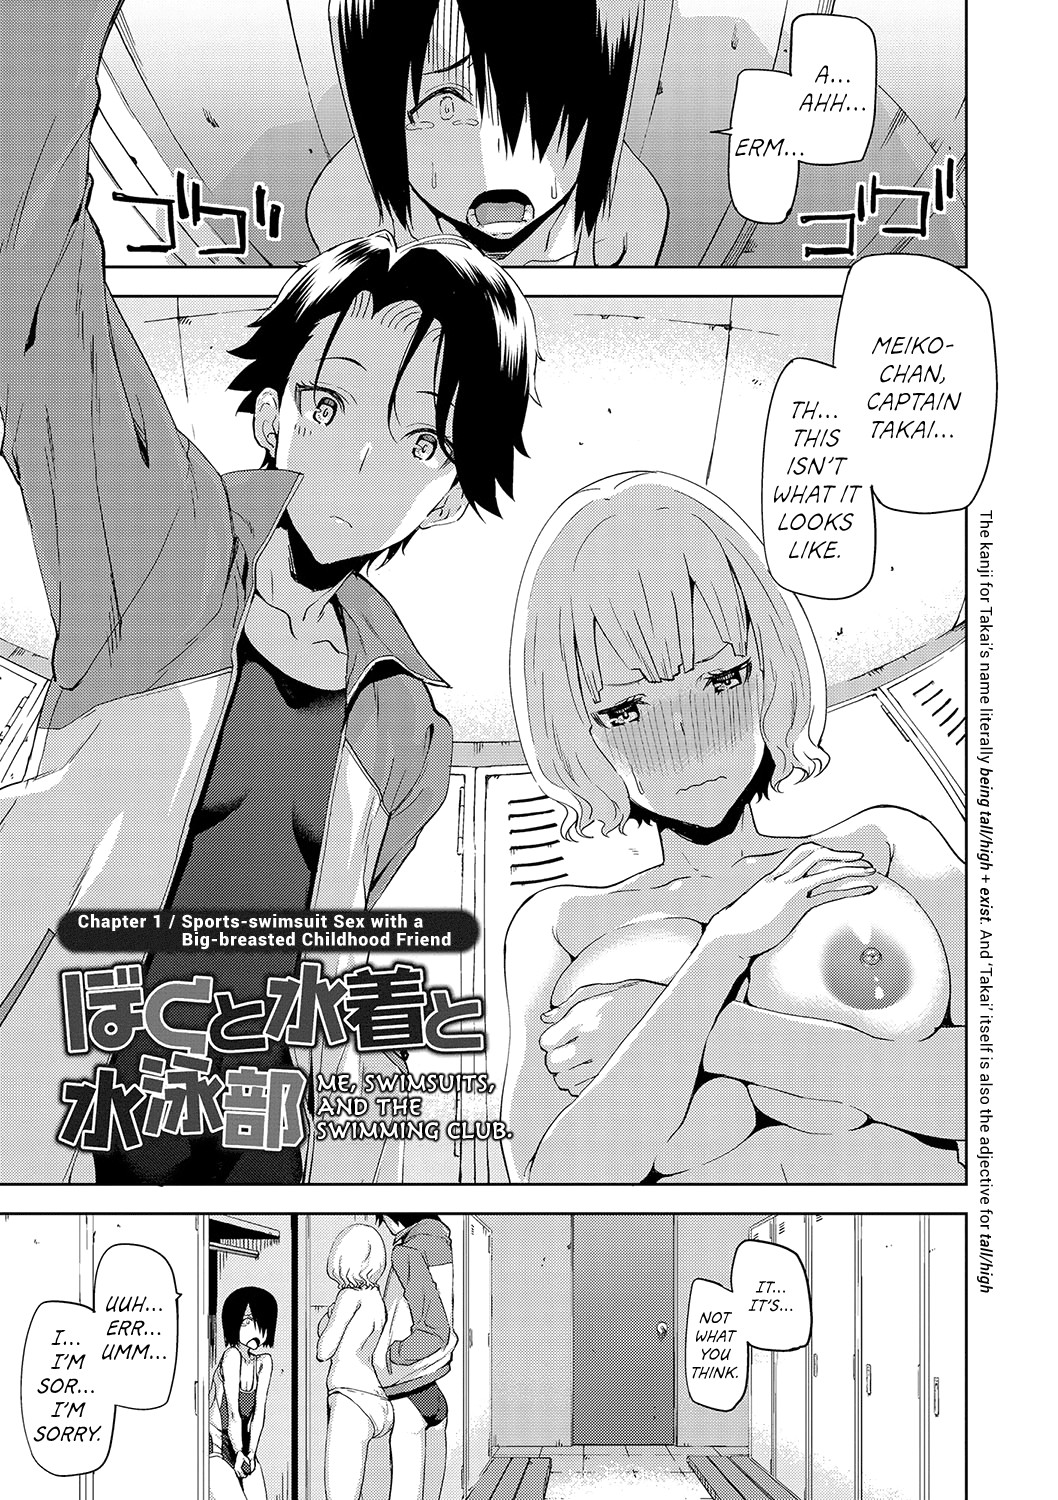 Hentai Manga Comic-Girls From Point Of View-Chapter 6-8-1